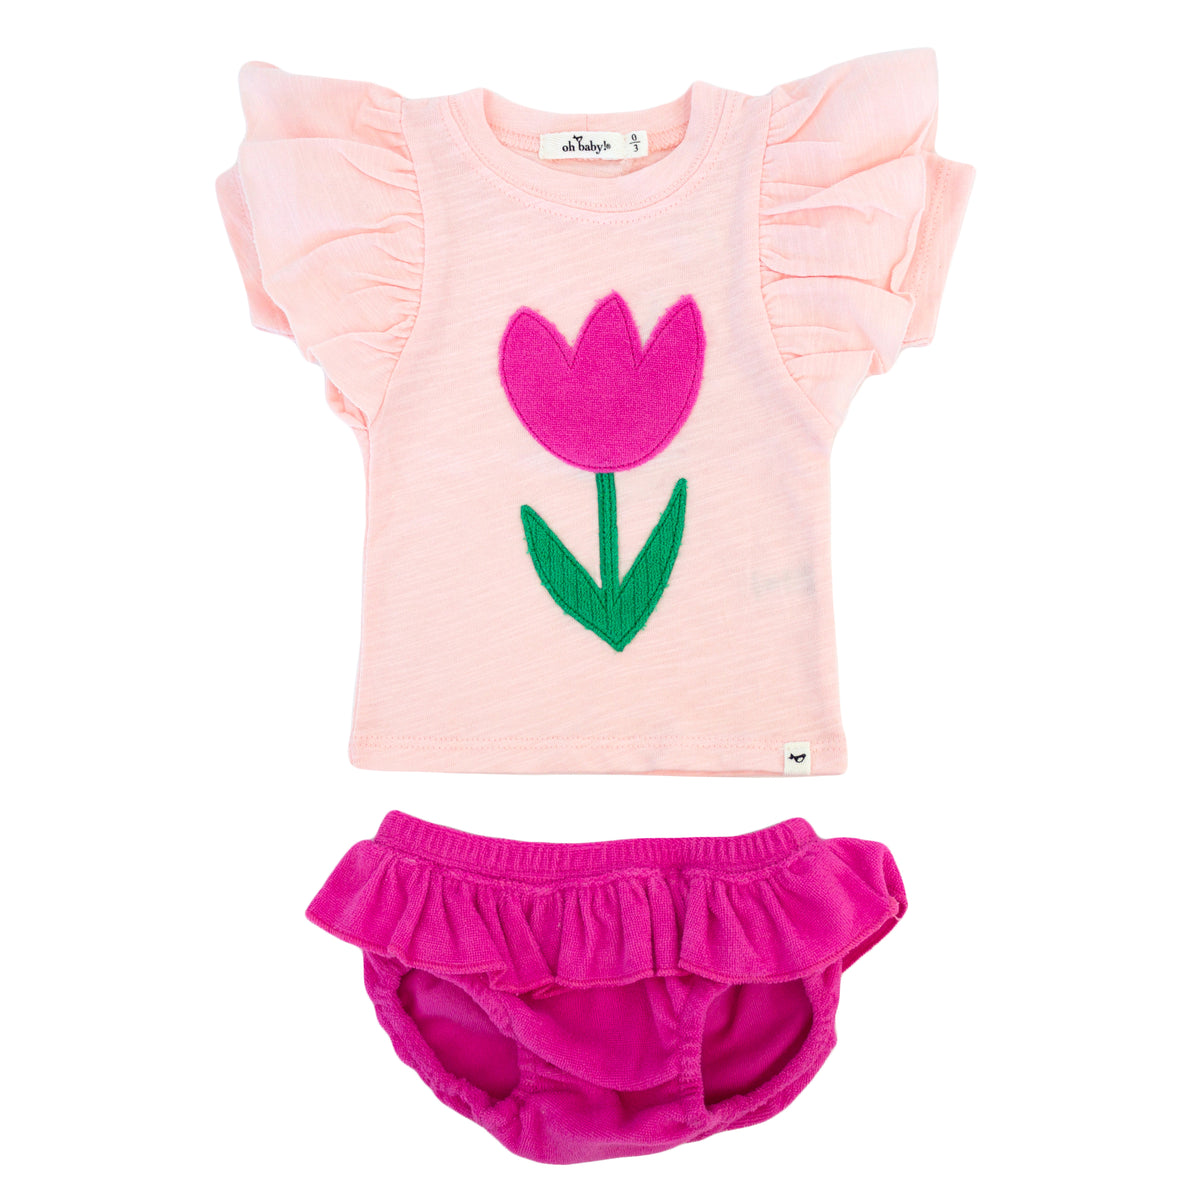 oh baby! Butterfly Short Sleeve Tee with Terry Tushie - Tulip Applique - Cotton Candy